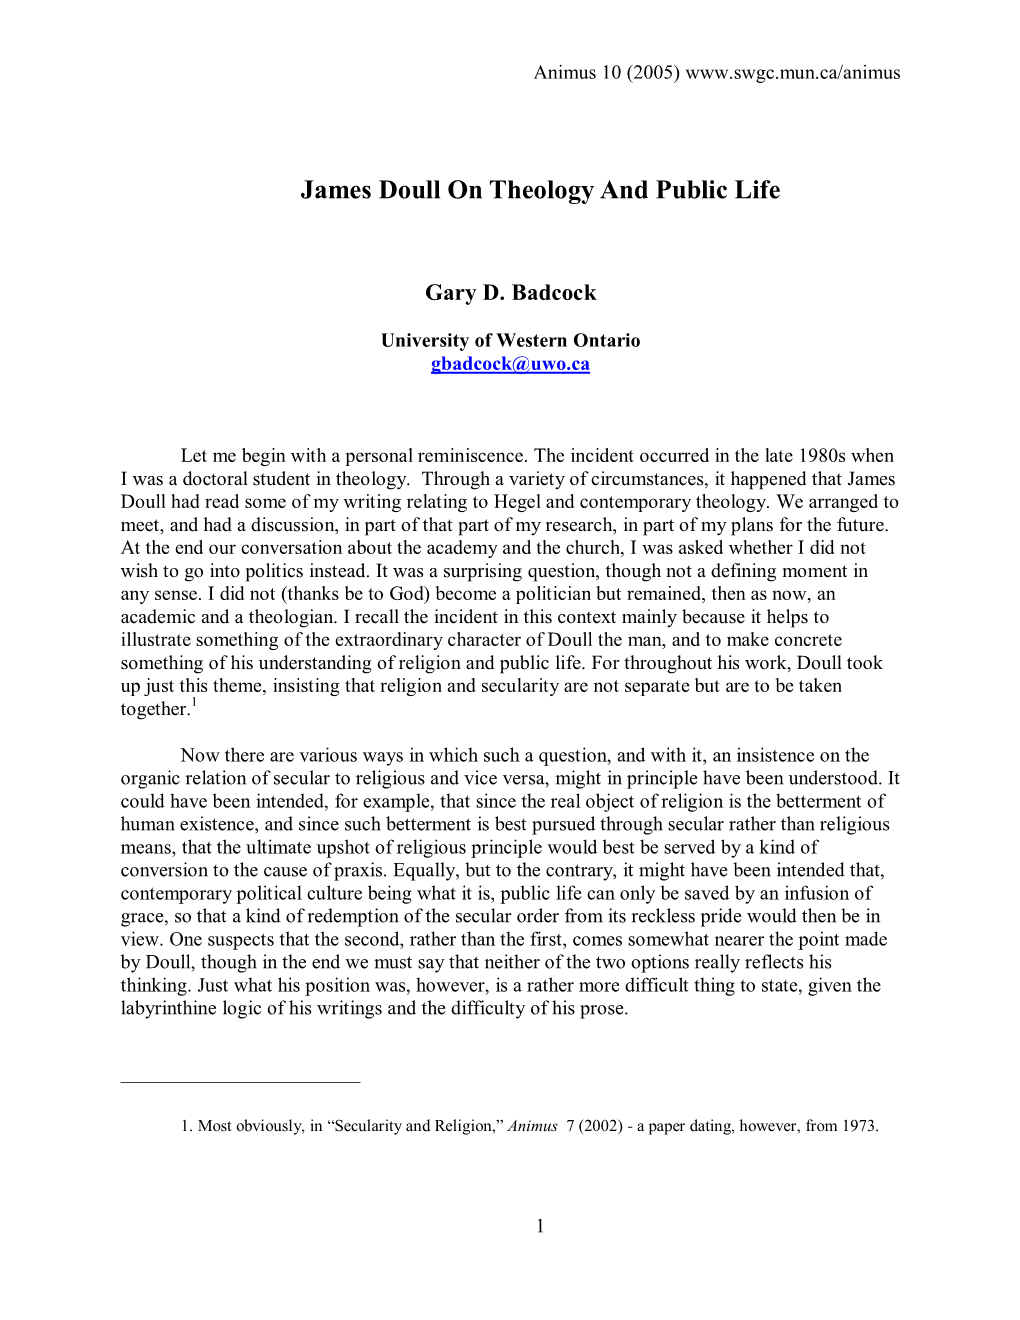 James Doull on Theology and Public Life